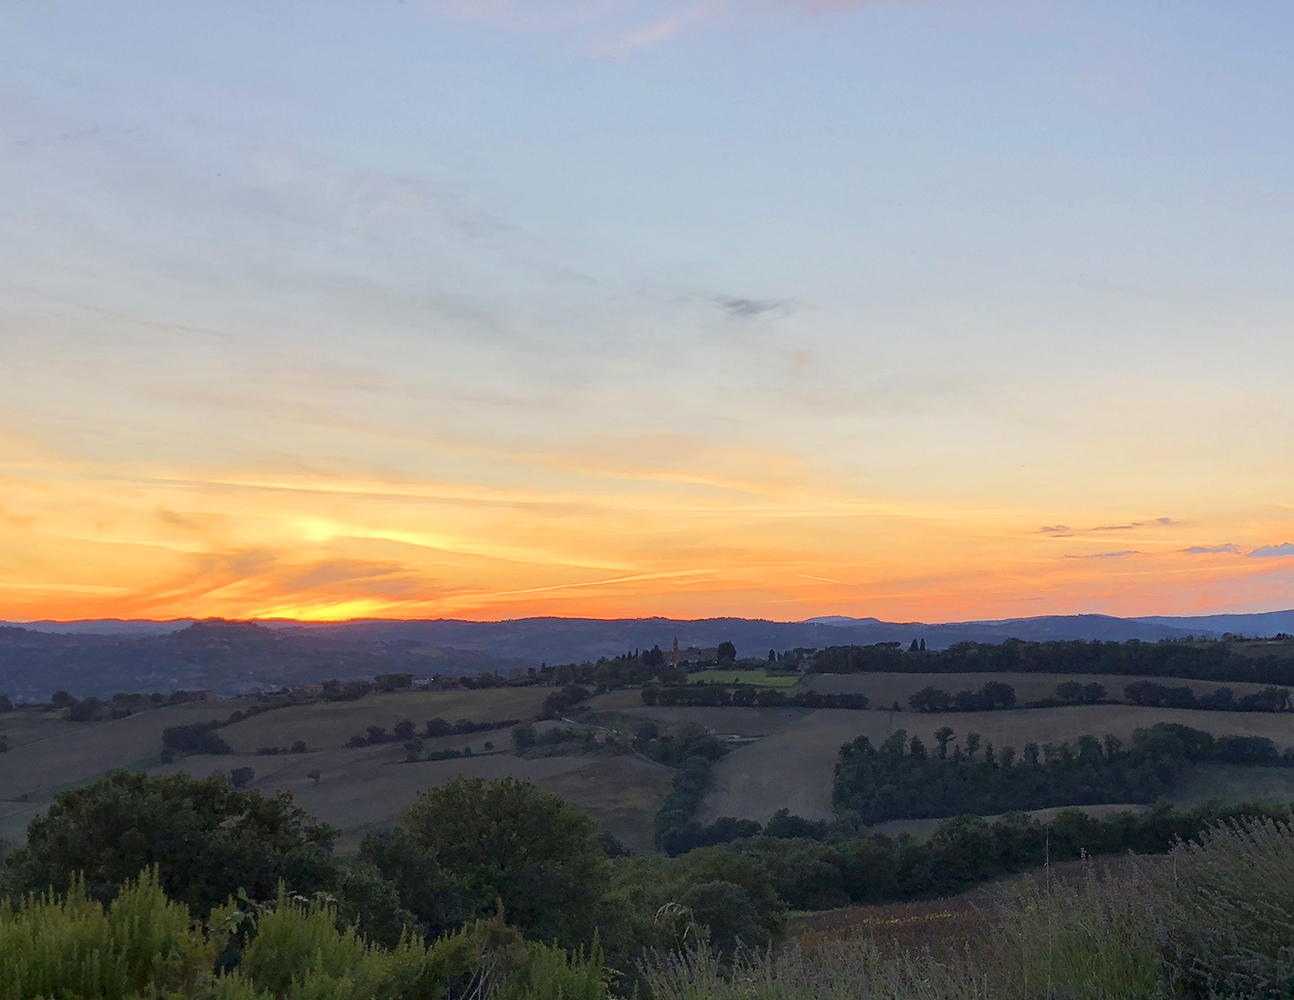 Sunset from Todi, Italy